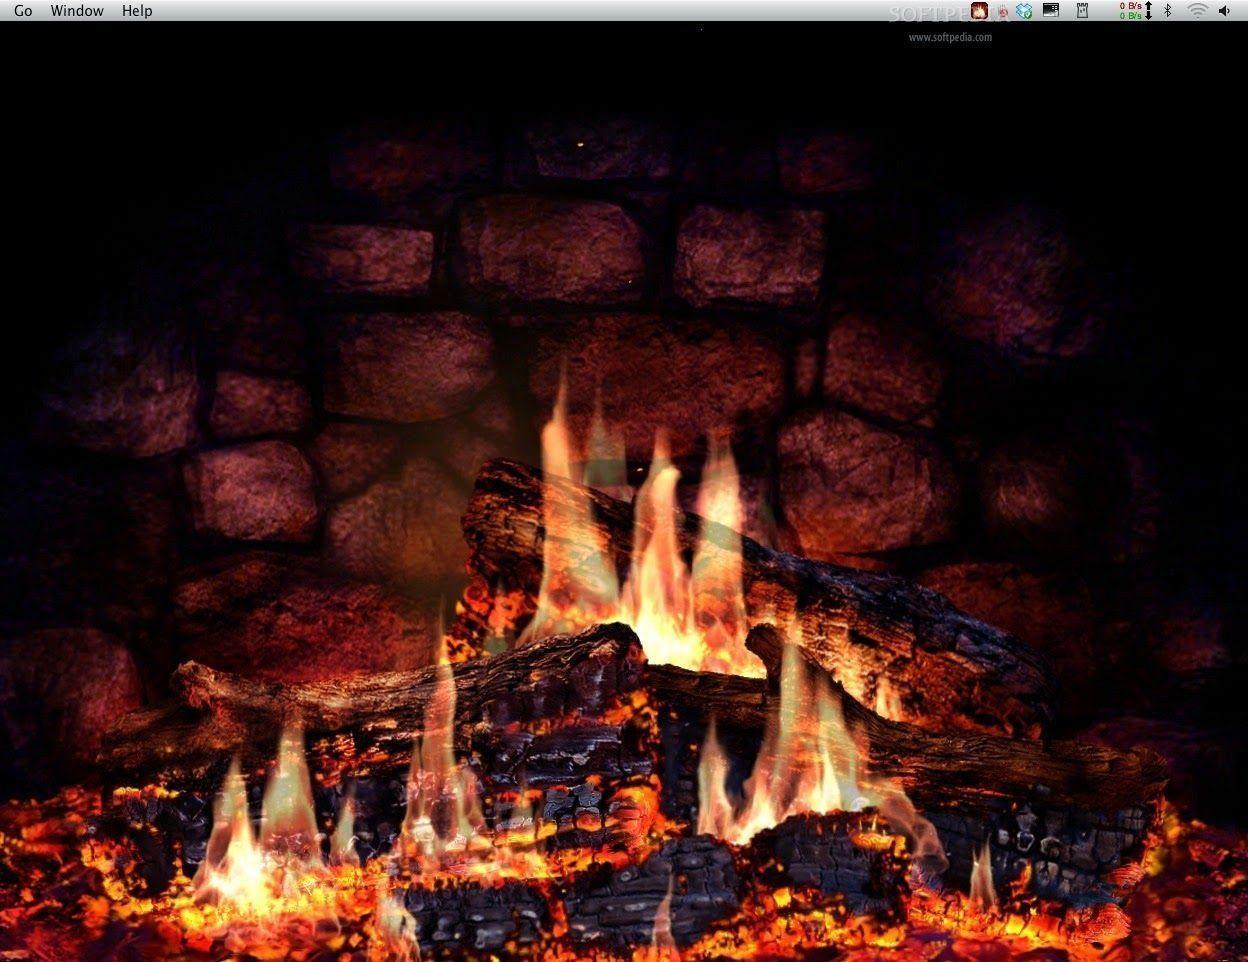 Wallpaper For > Animated Fireplace Wallpaper